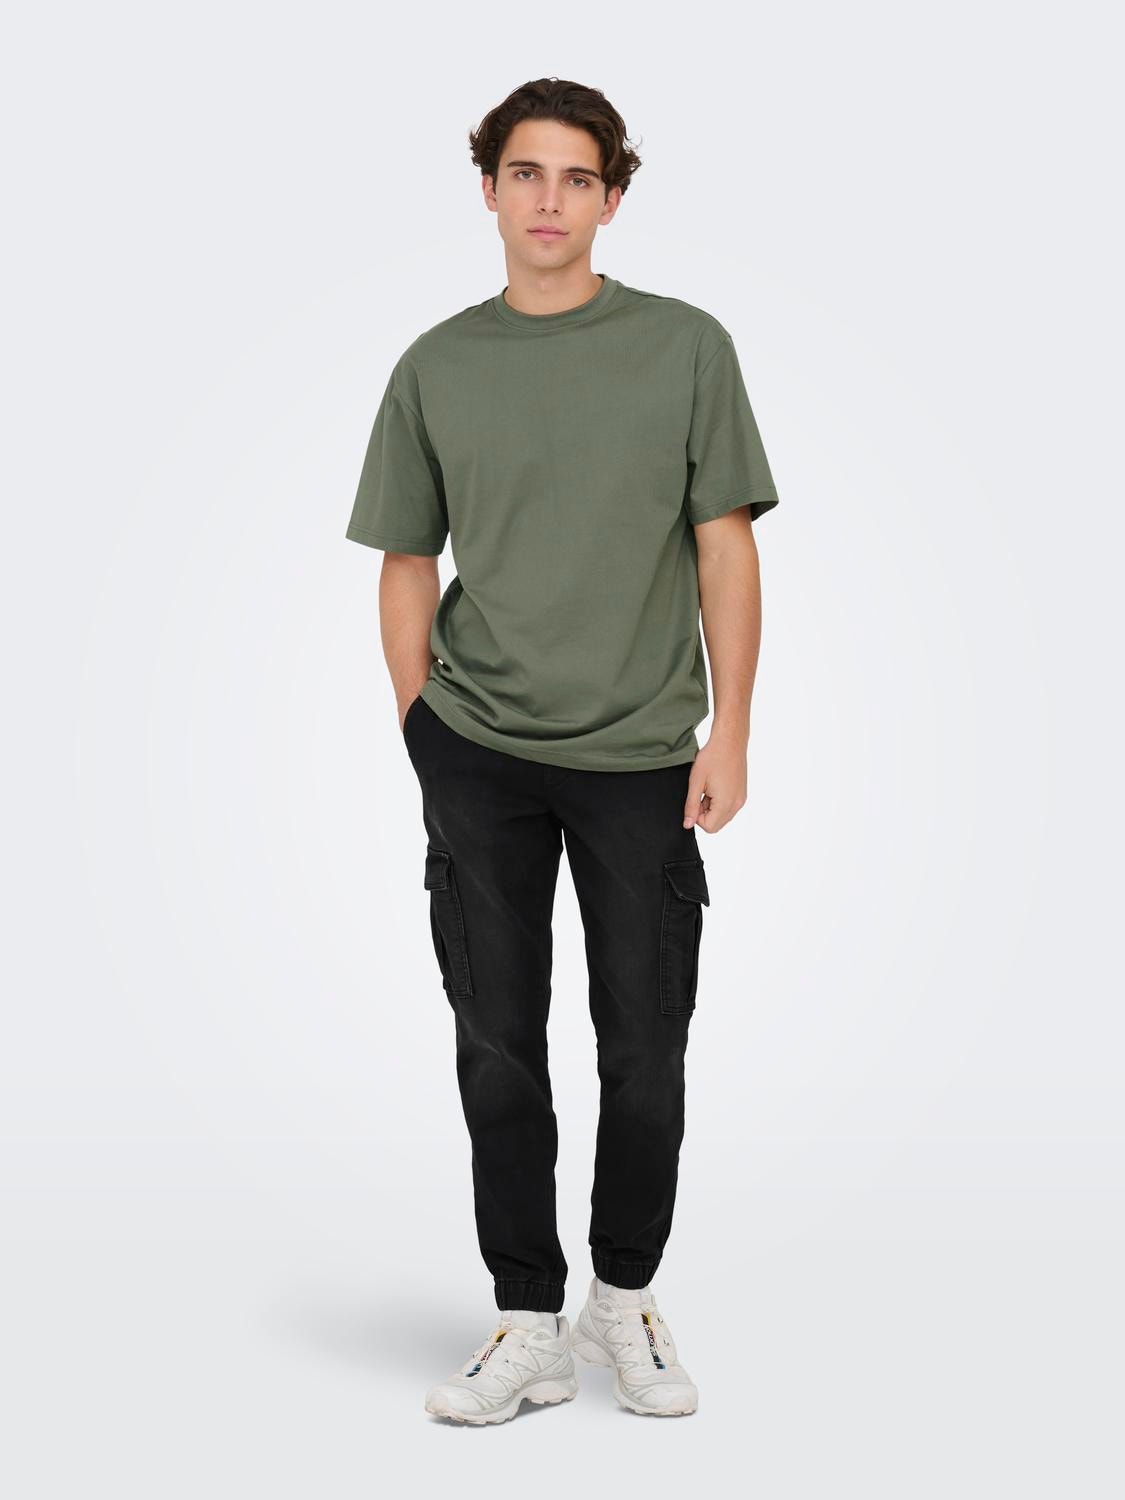 ONLY & SONS Cargo trousers -Washed Black - 22027398